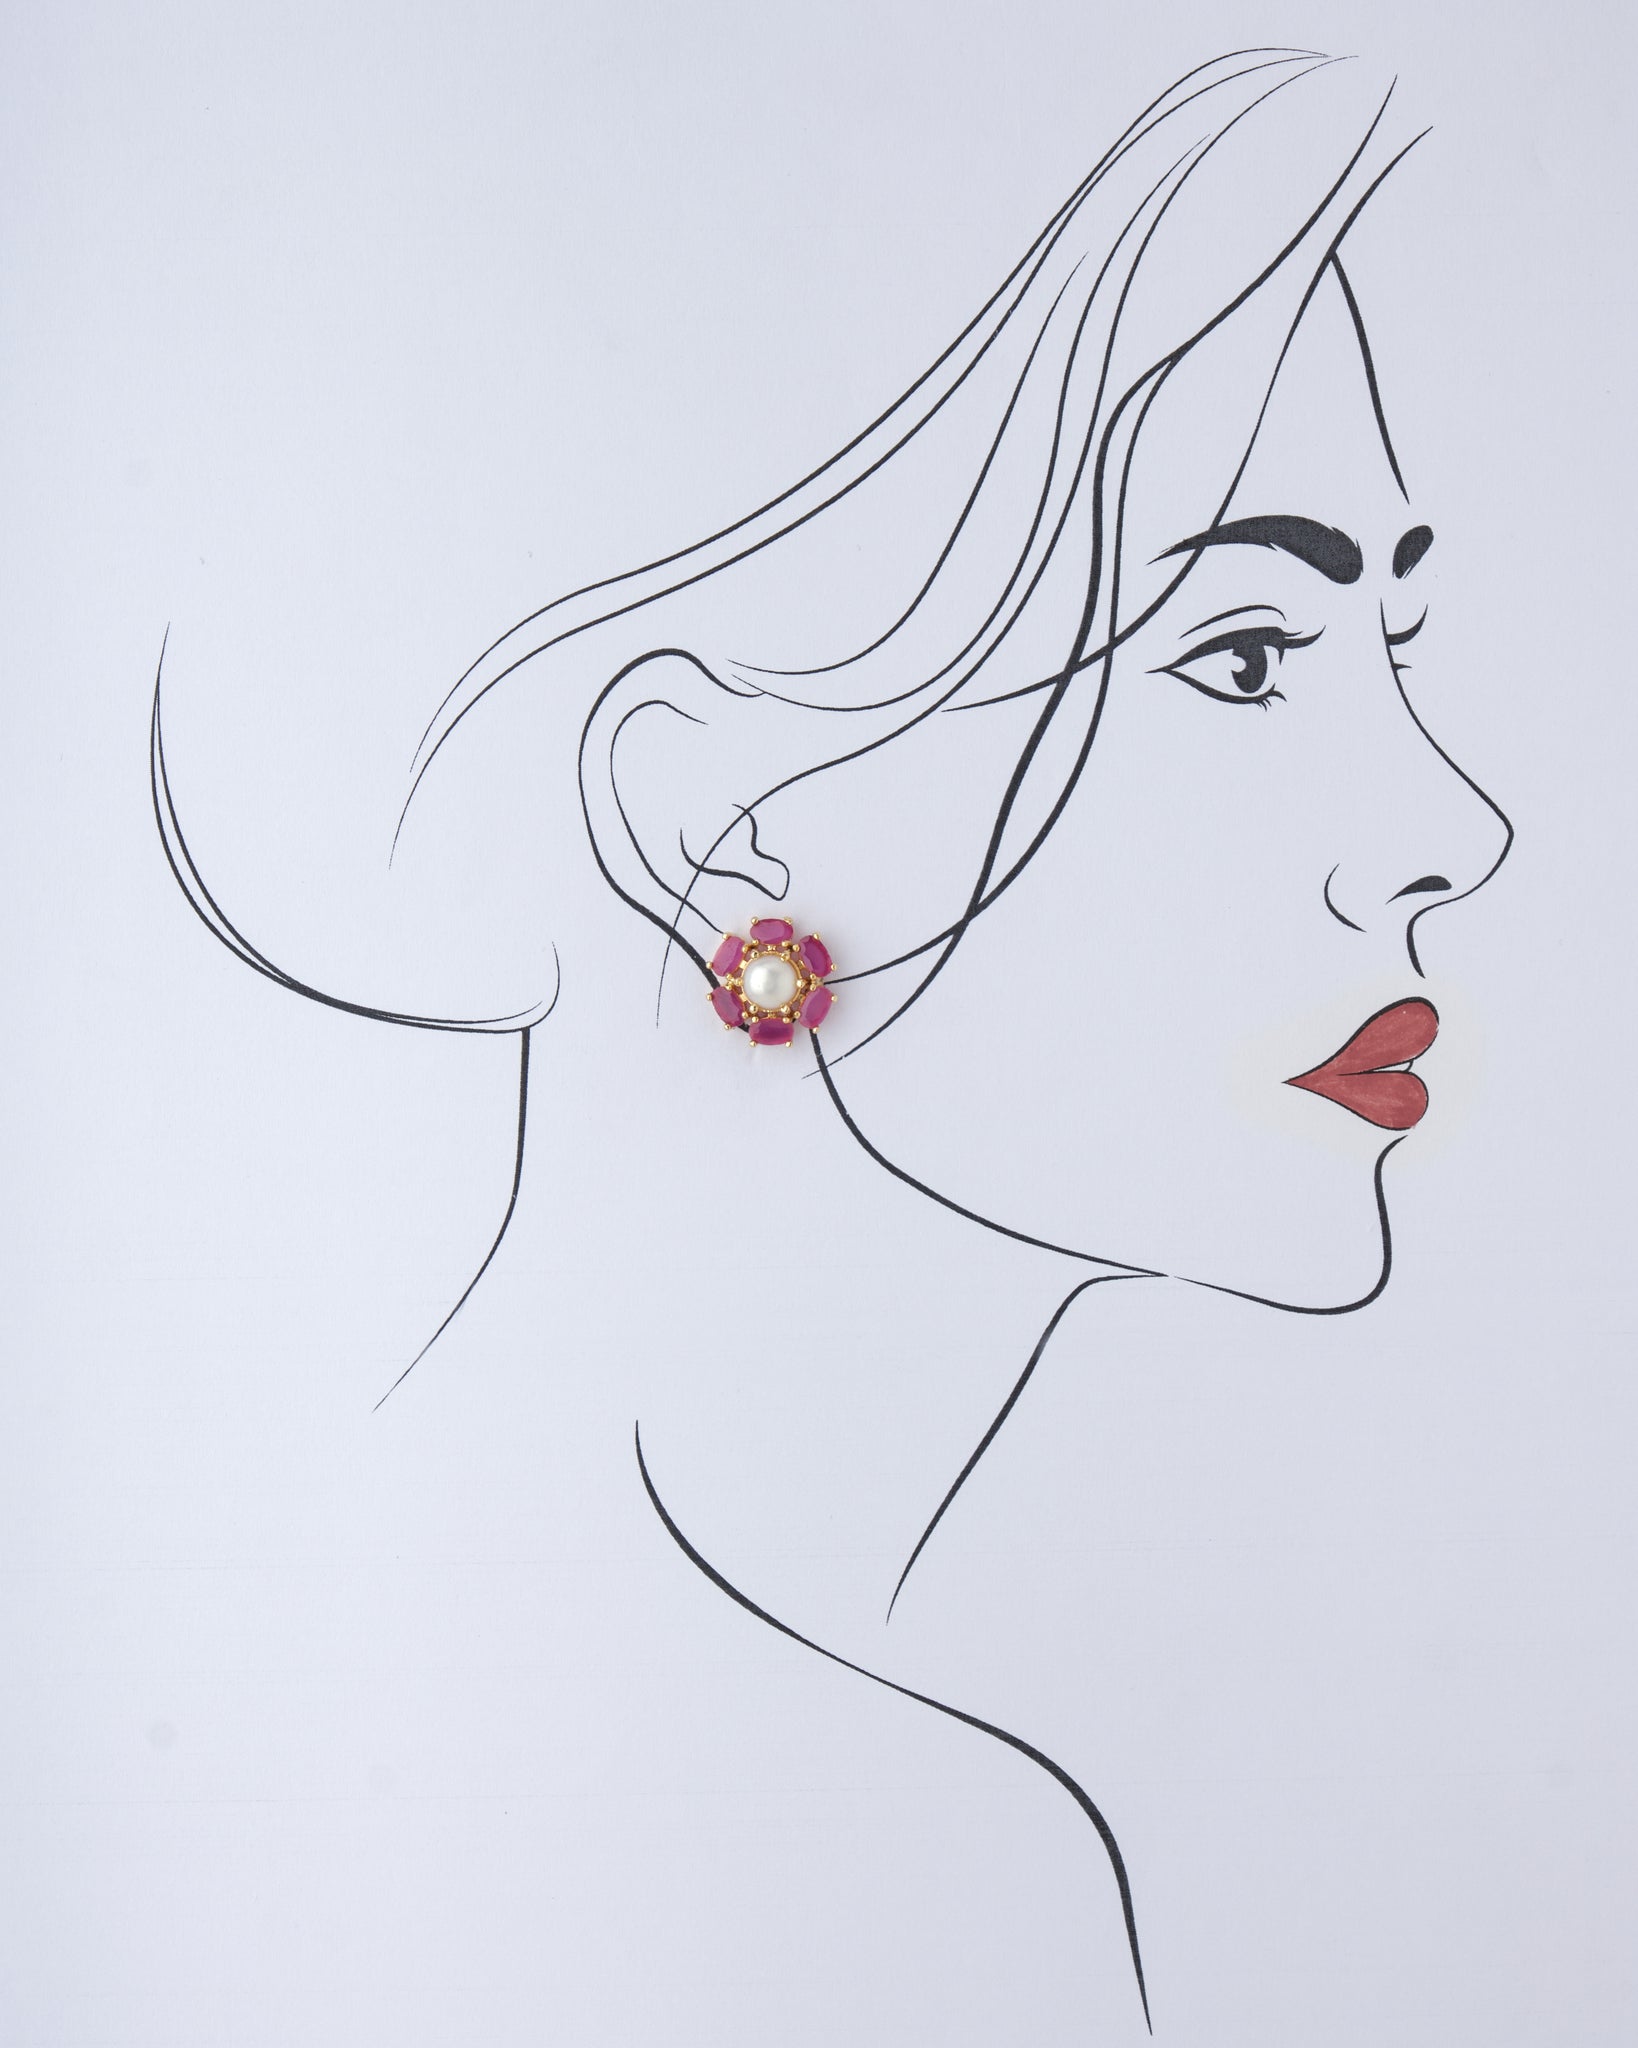 HAND SKETCH EARRING DESIGN CLICK TO SEE FINISHED PIECE by Jenessa Dee at  Coroflotcom